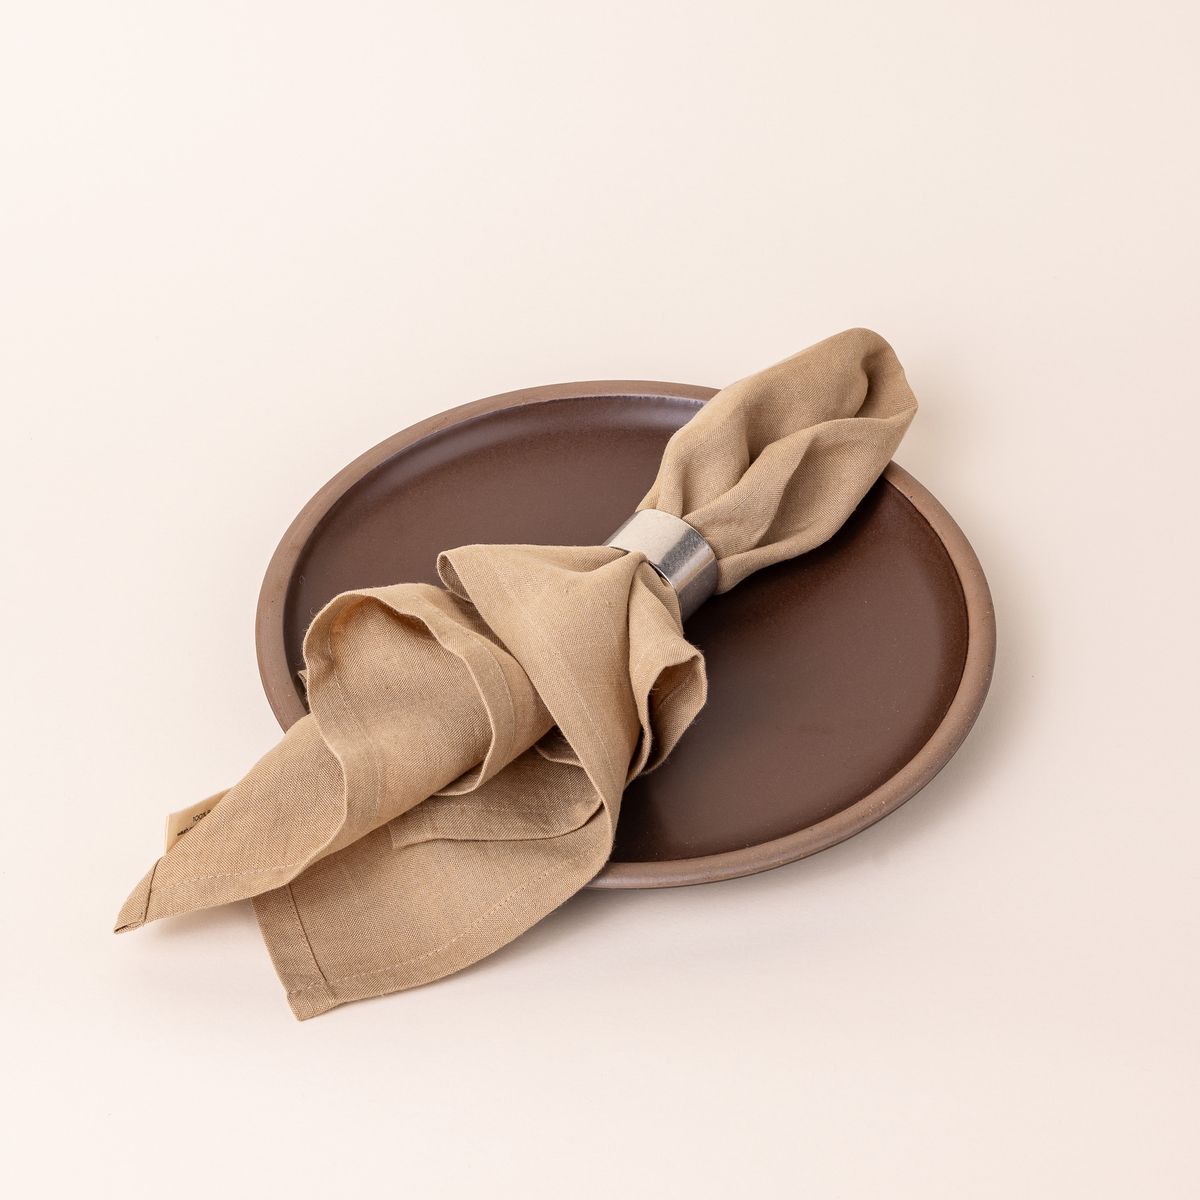 A light tan linen napkin is folded by the center through simple pewter napkin ring and sitting on a brown dinner plate.